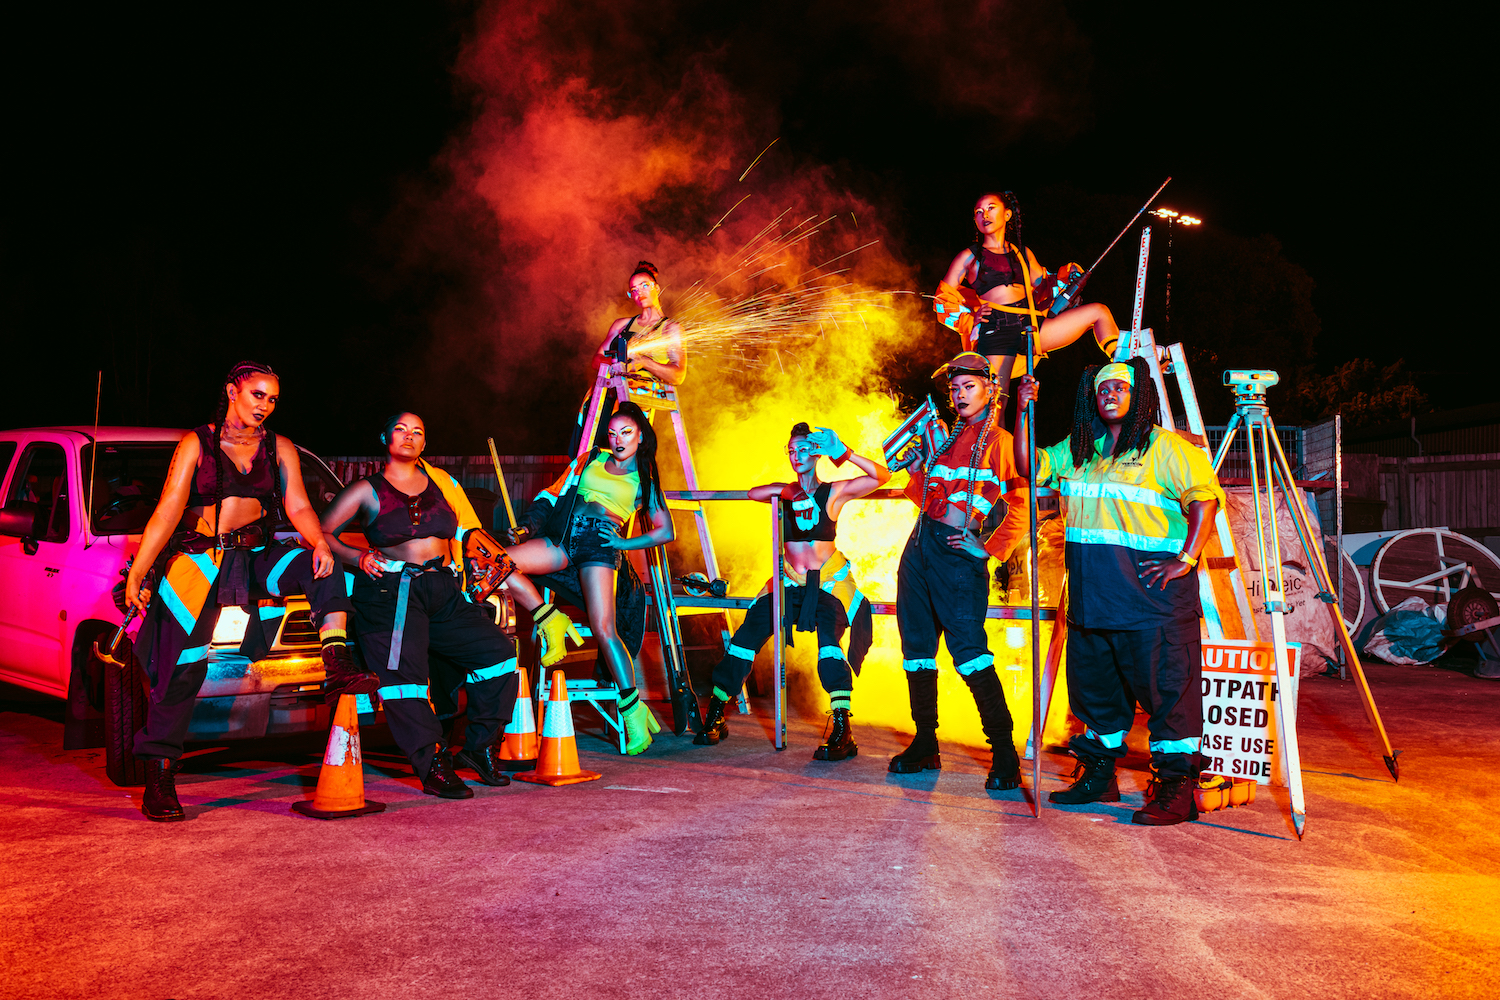 A group of tradies stand on stage posing around ladders and fire.